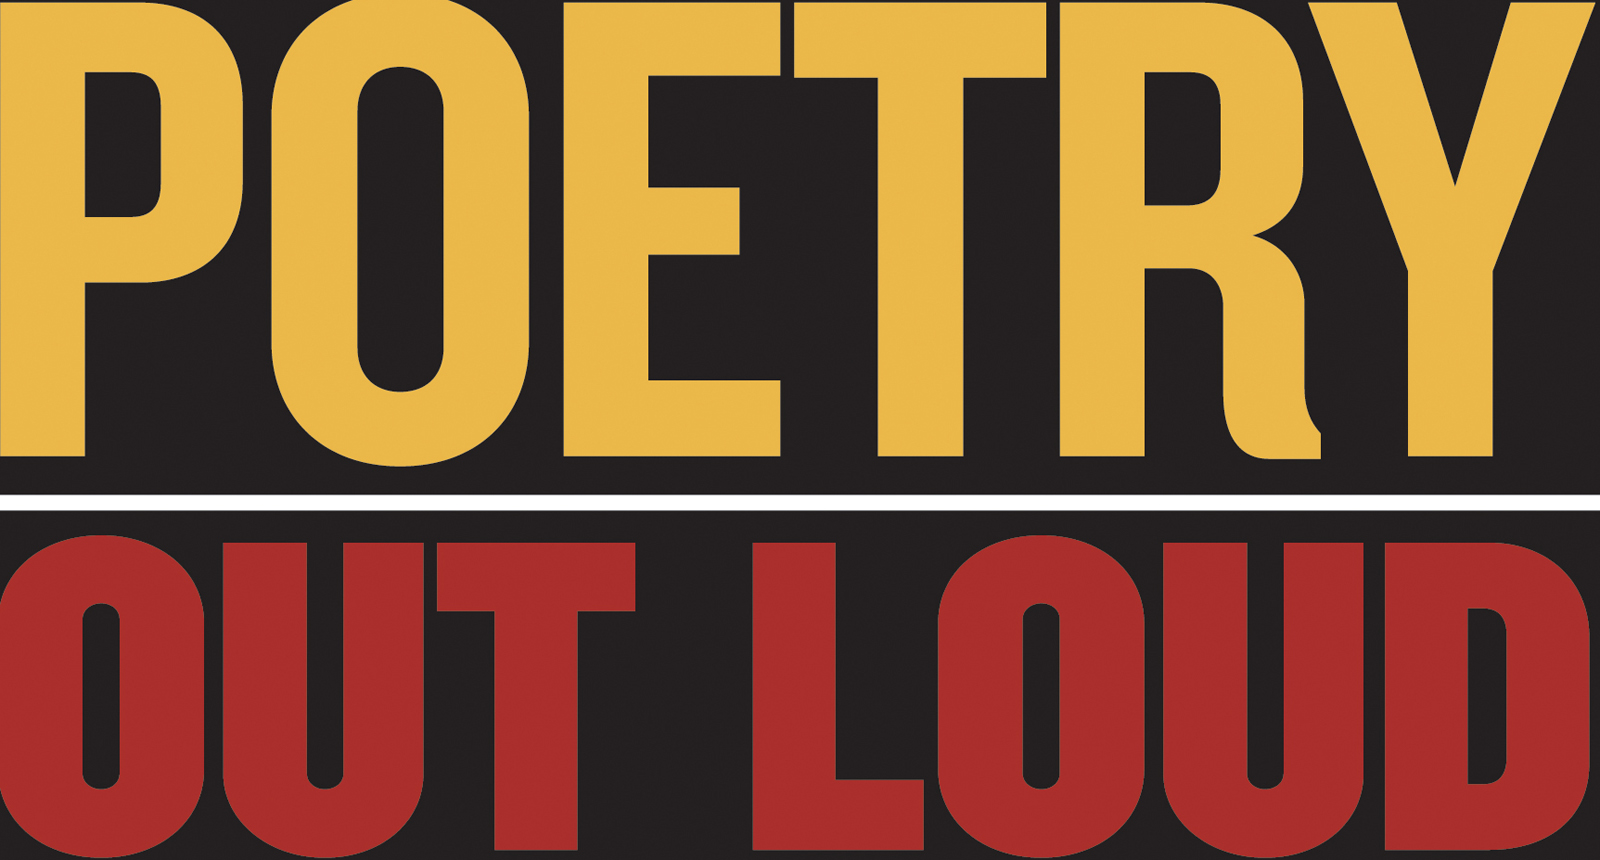 Teachers: Sign up for Poetry Out Loud by November 22